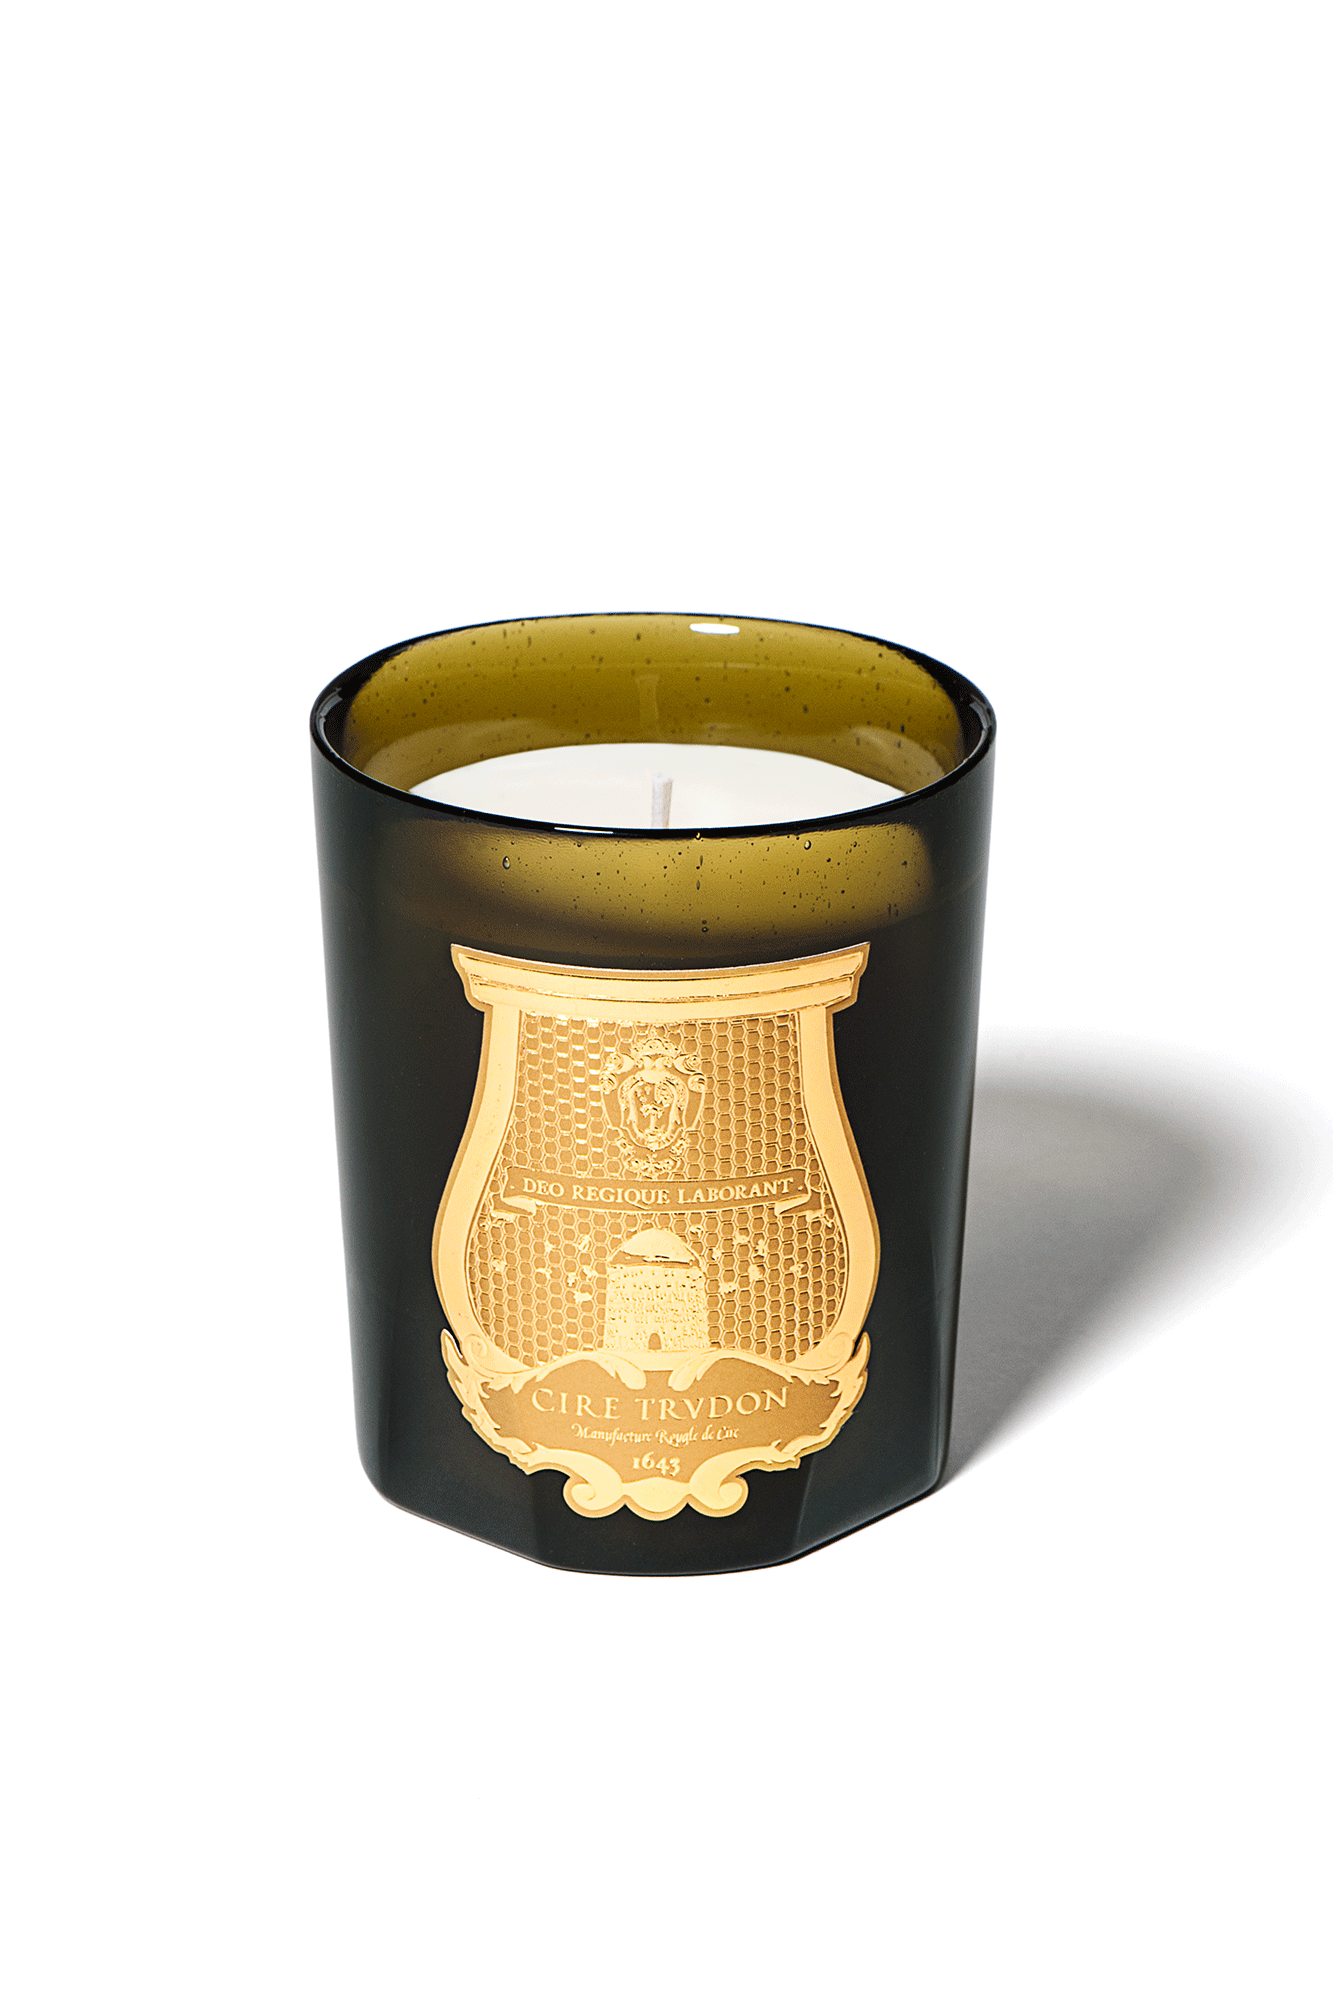 Gabriel introduces welcomed warmth to chilly Winter afternoons. With notes of leather, cashmere wood, and candied chestnuts, the fragrance weaves happy, cozy memories.